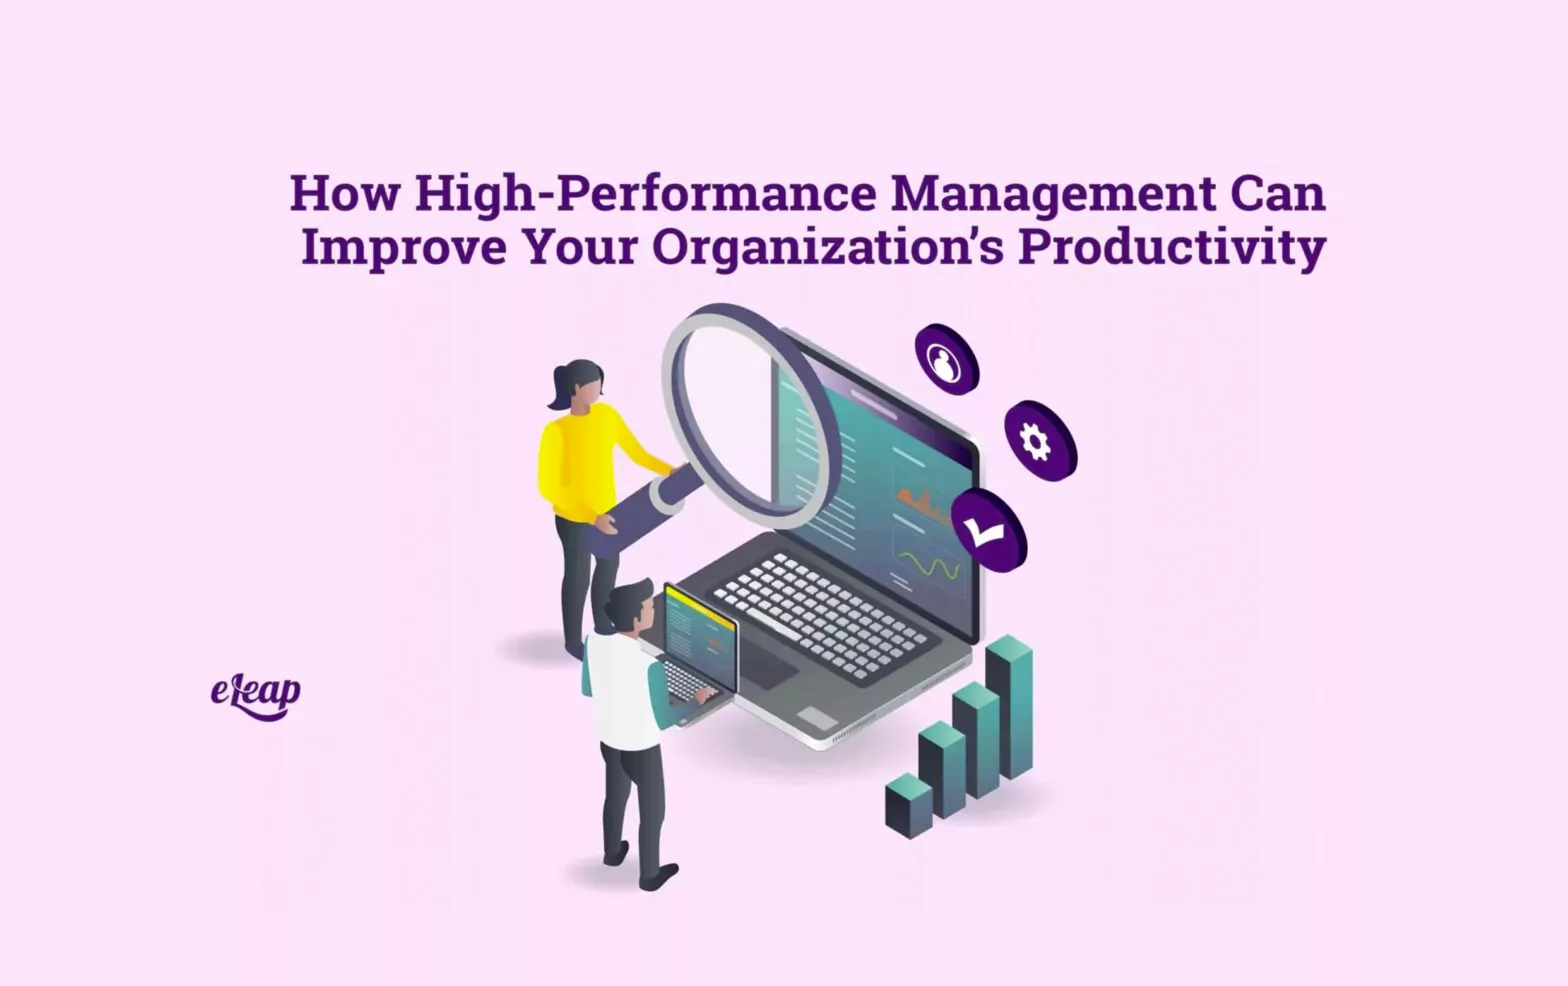 How High-Performance Management Can Improve Your Organization’s Productivity